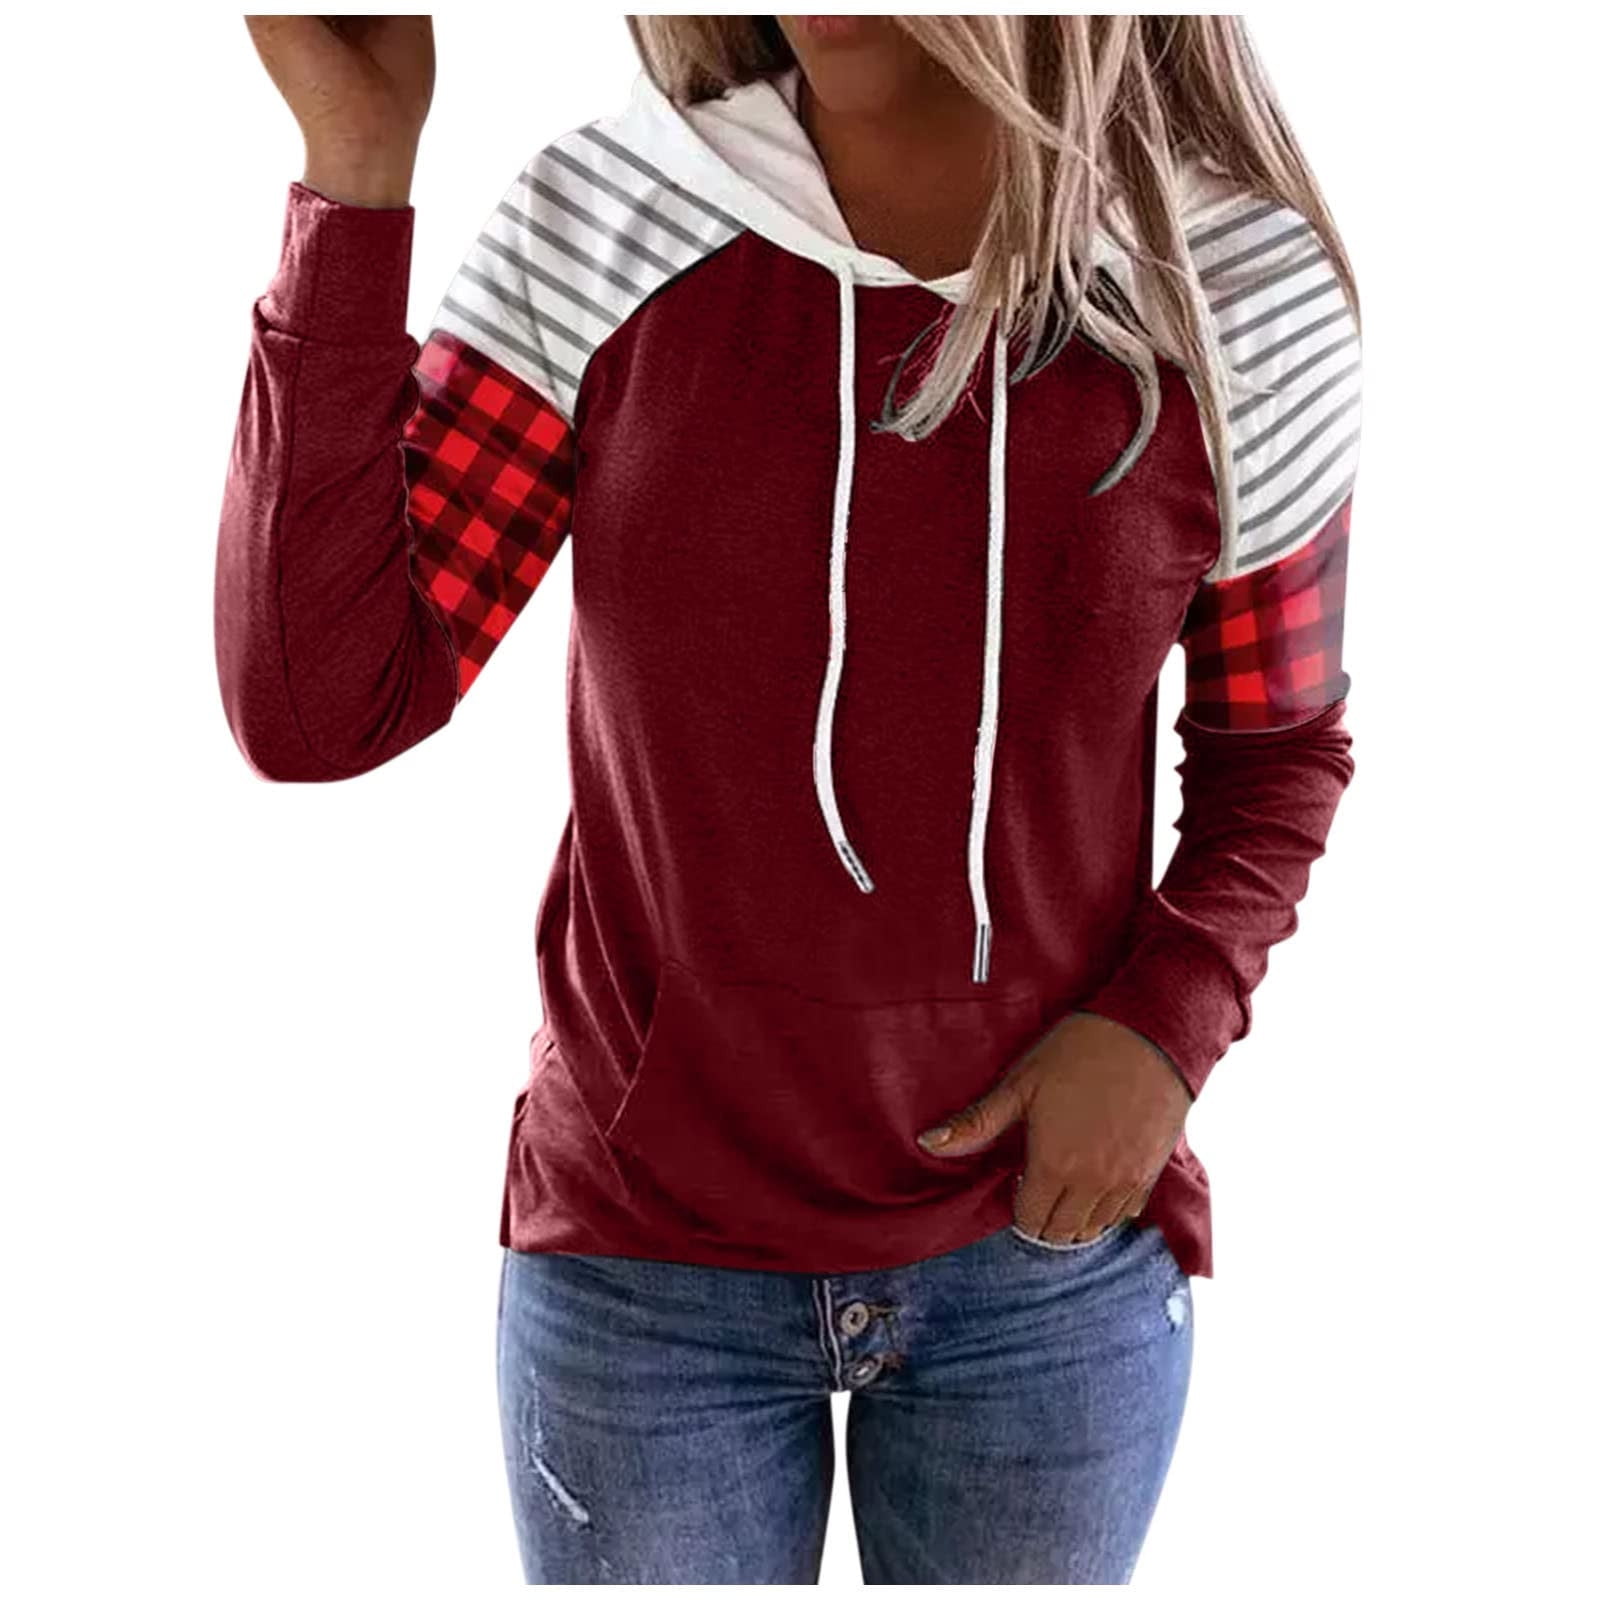 Women's Sweatshirts Fall Hoodies Blouse with Flower Printed Casual Long Sleeve T Shirts Pullover Sweatshirt with Pocket 